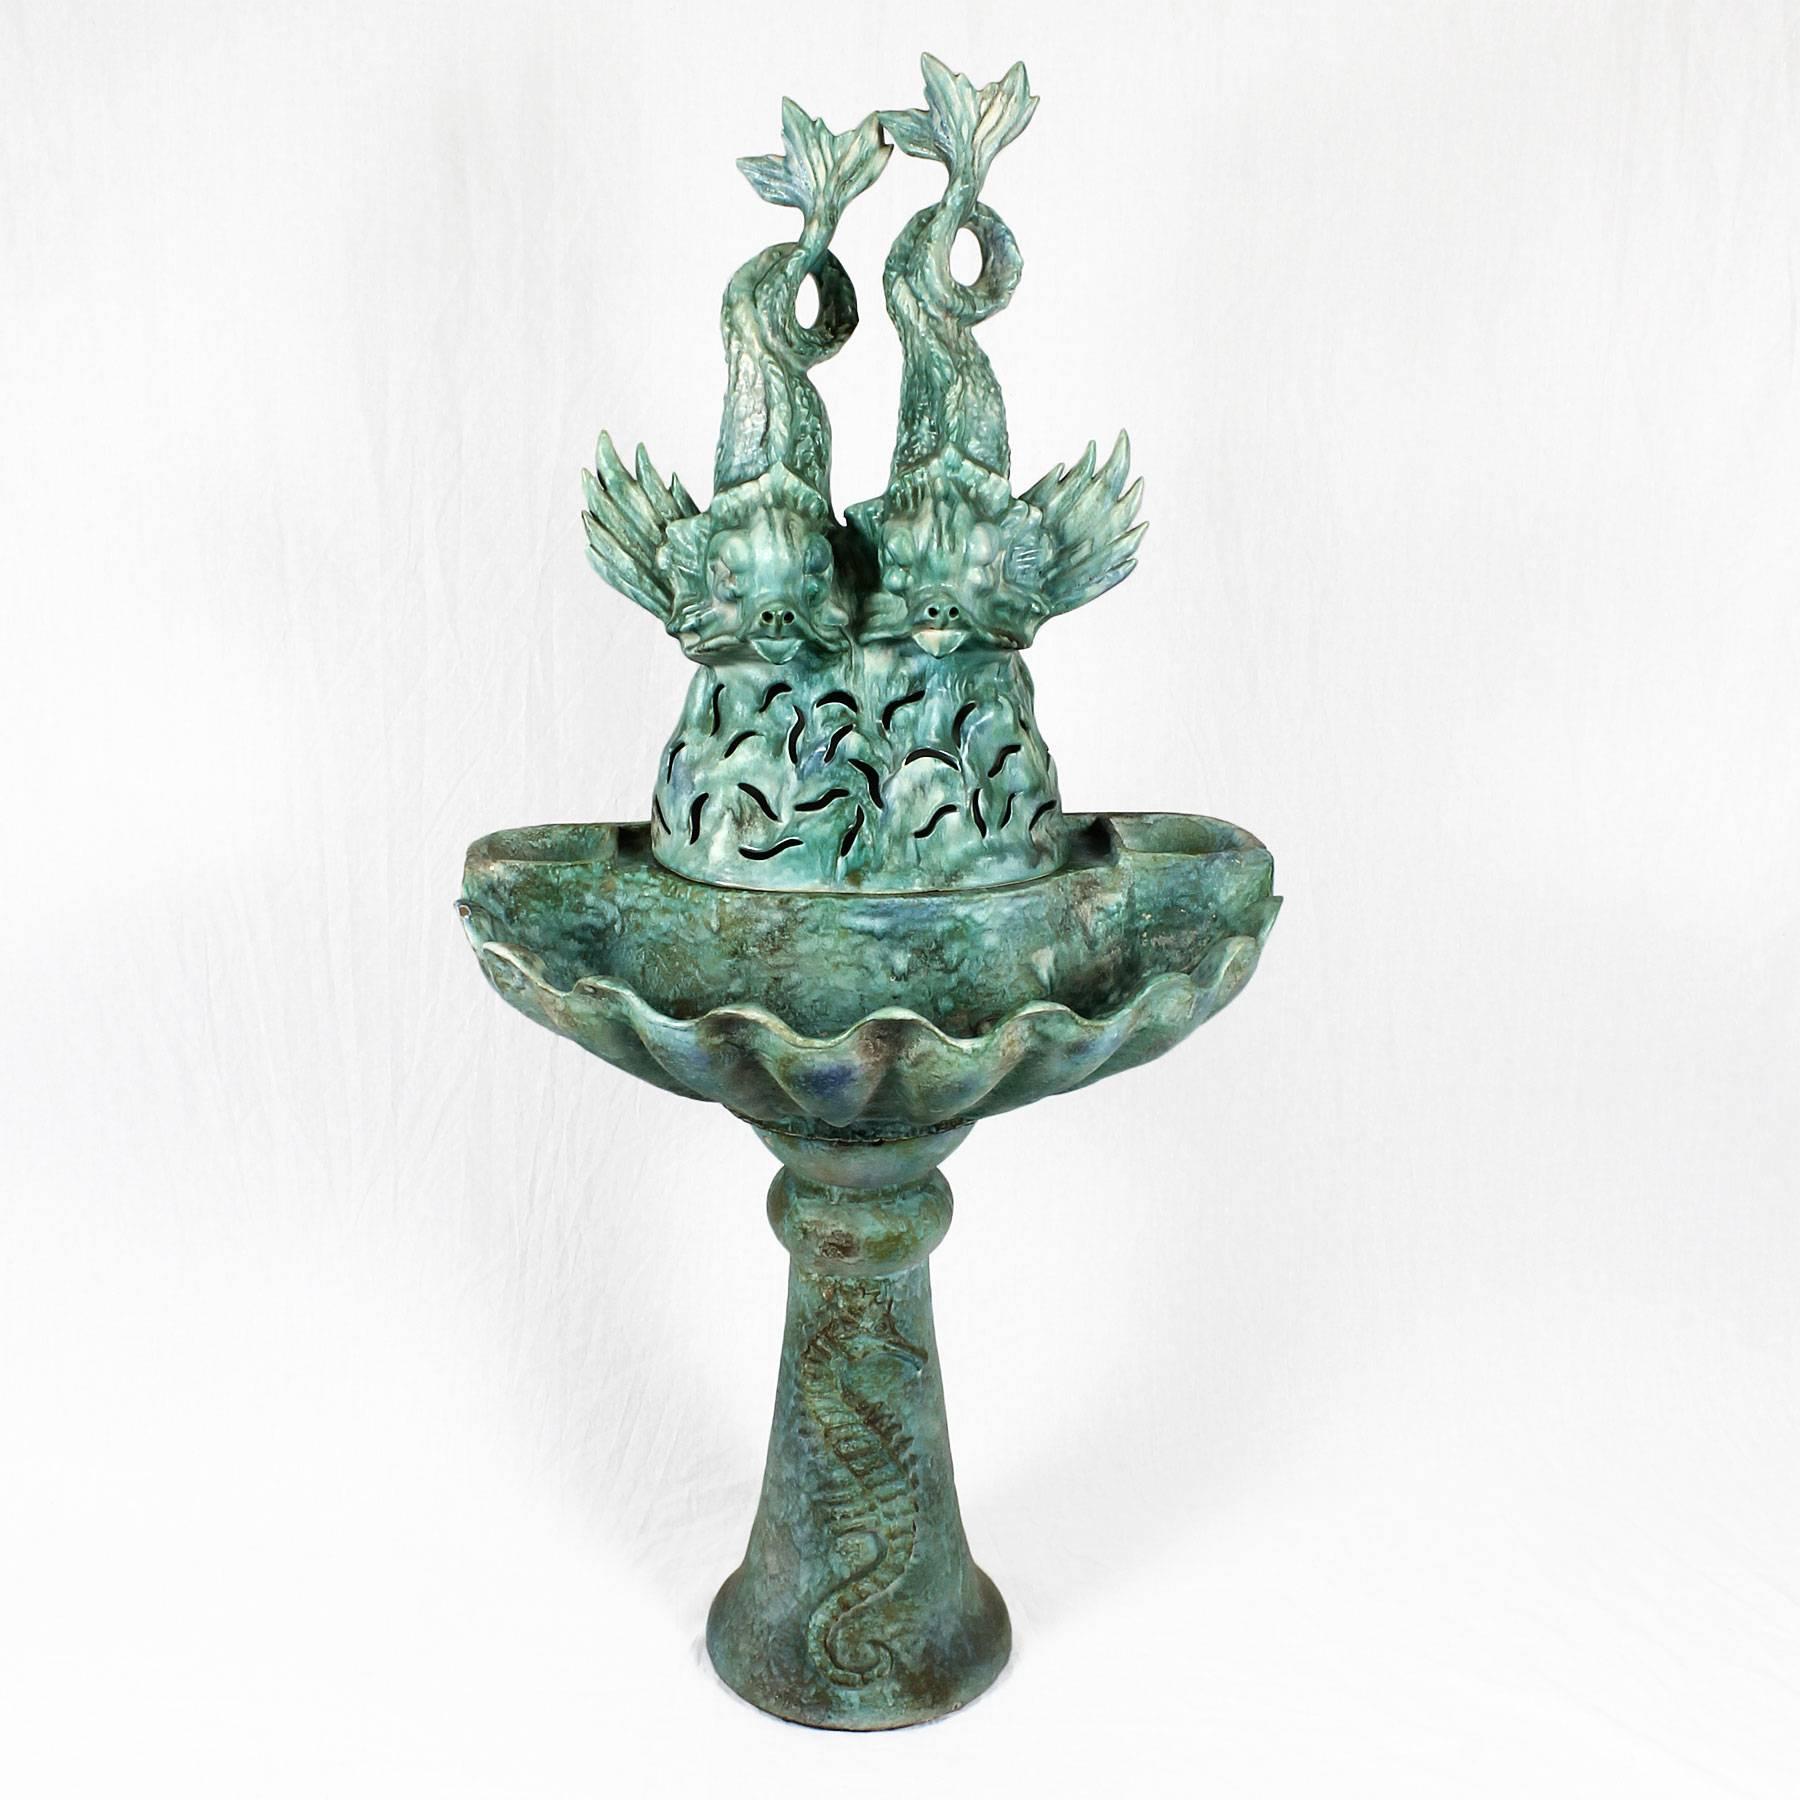 Green and blue enameled ceramic fountain, marine decoration. Form by three pieces, stand with seahorse decoration, basin (bowl) with a shell shape and a cover with dolphins decoration. Motor to be repaired.
Attributed to Clément Massier
Maker: Les